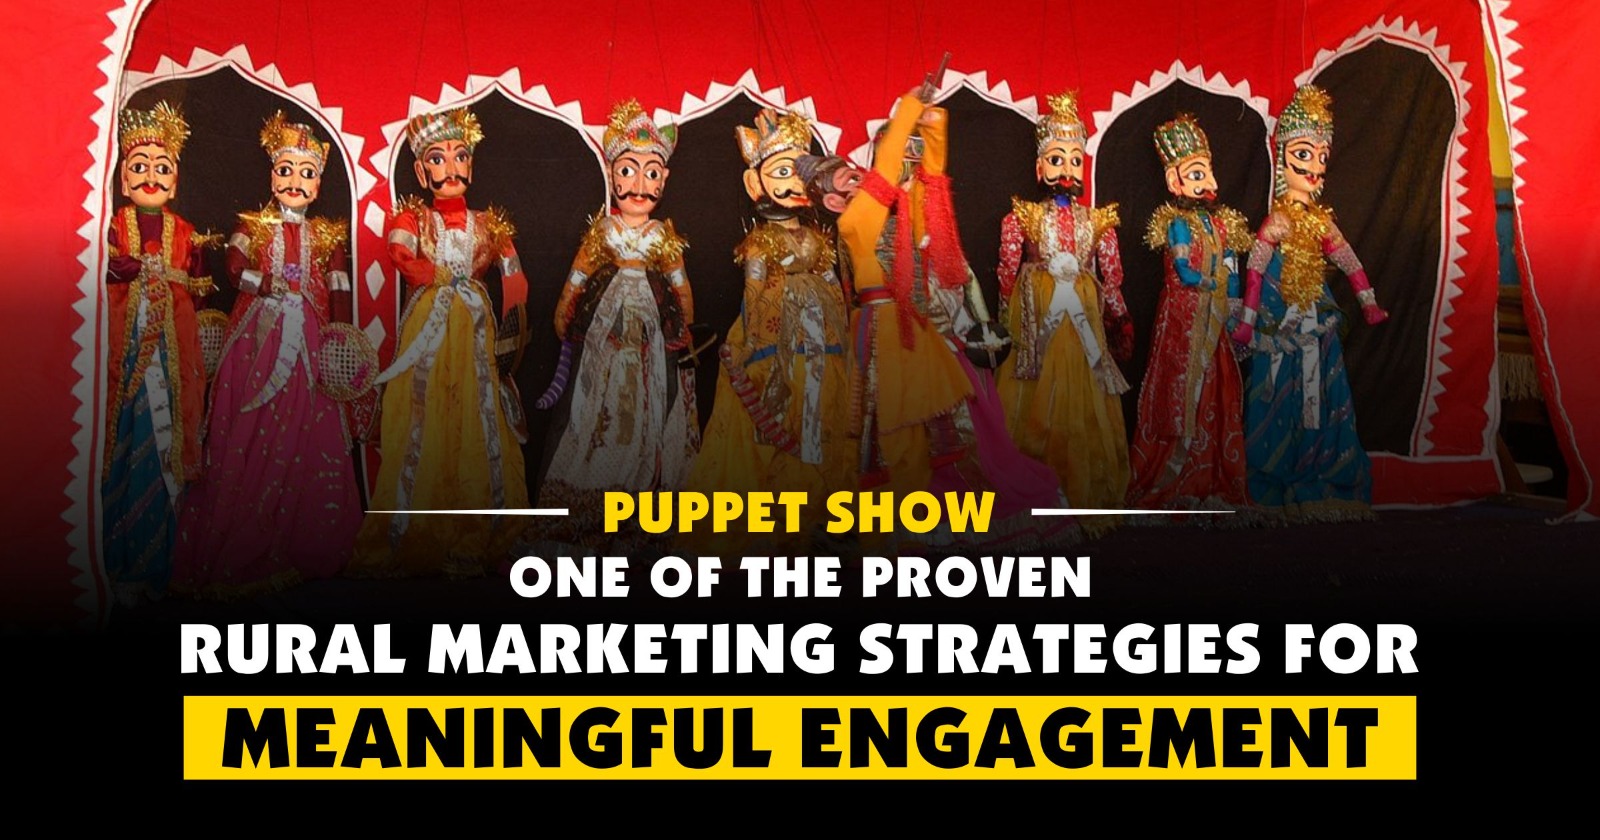 Puppet Show as Rural Marketing Strategies